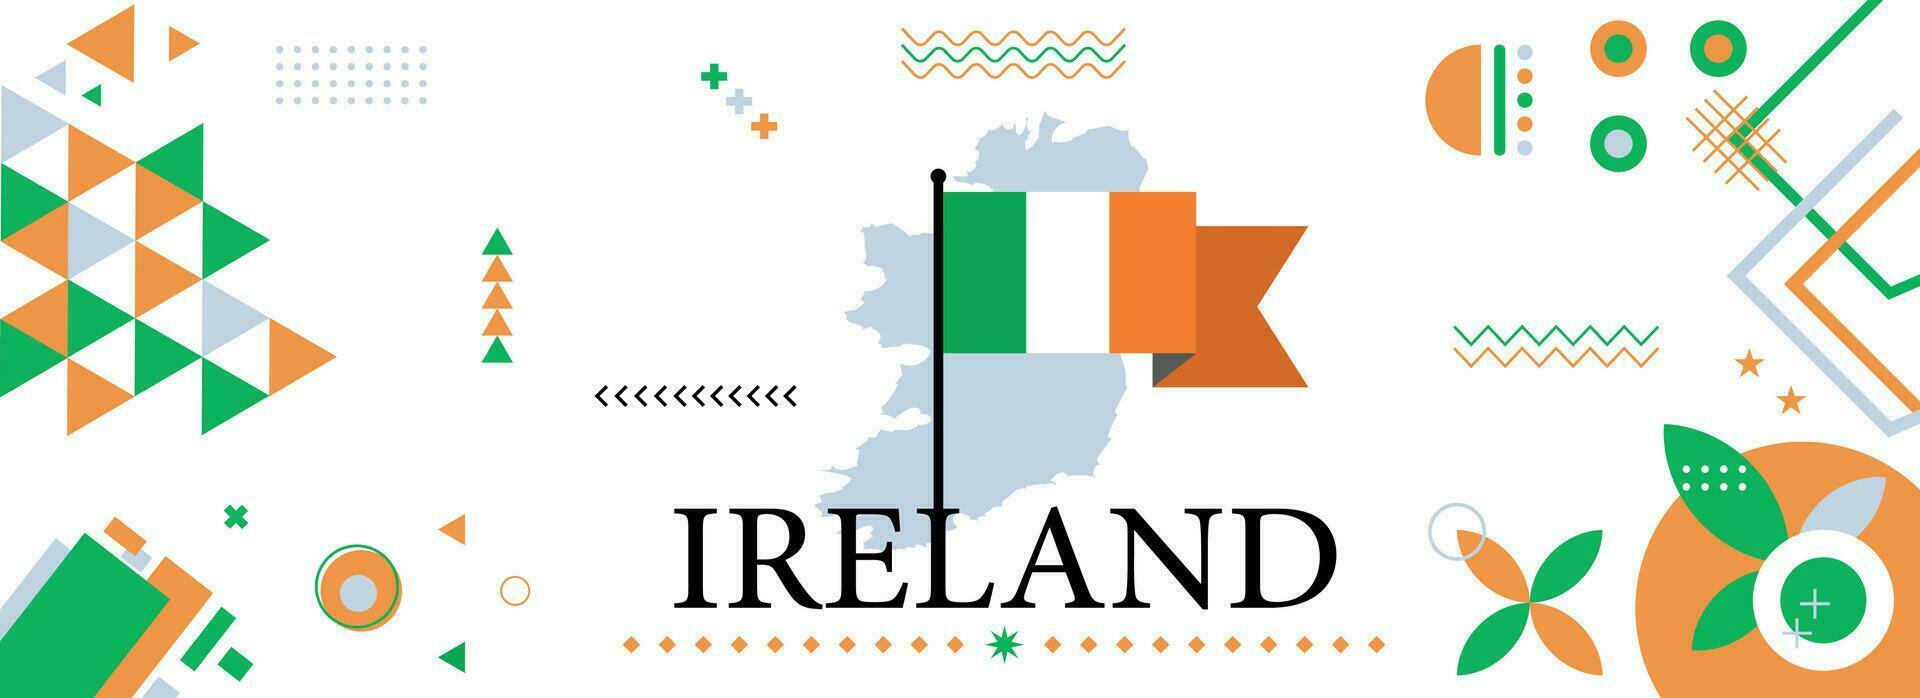 Ireland national or independence day banner design for country celebration. Flag and map of Ireland with modern retro design and abstract geometric icons. Vector illustration